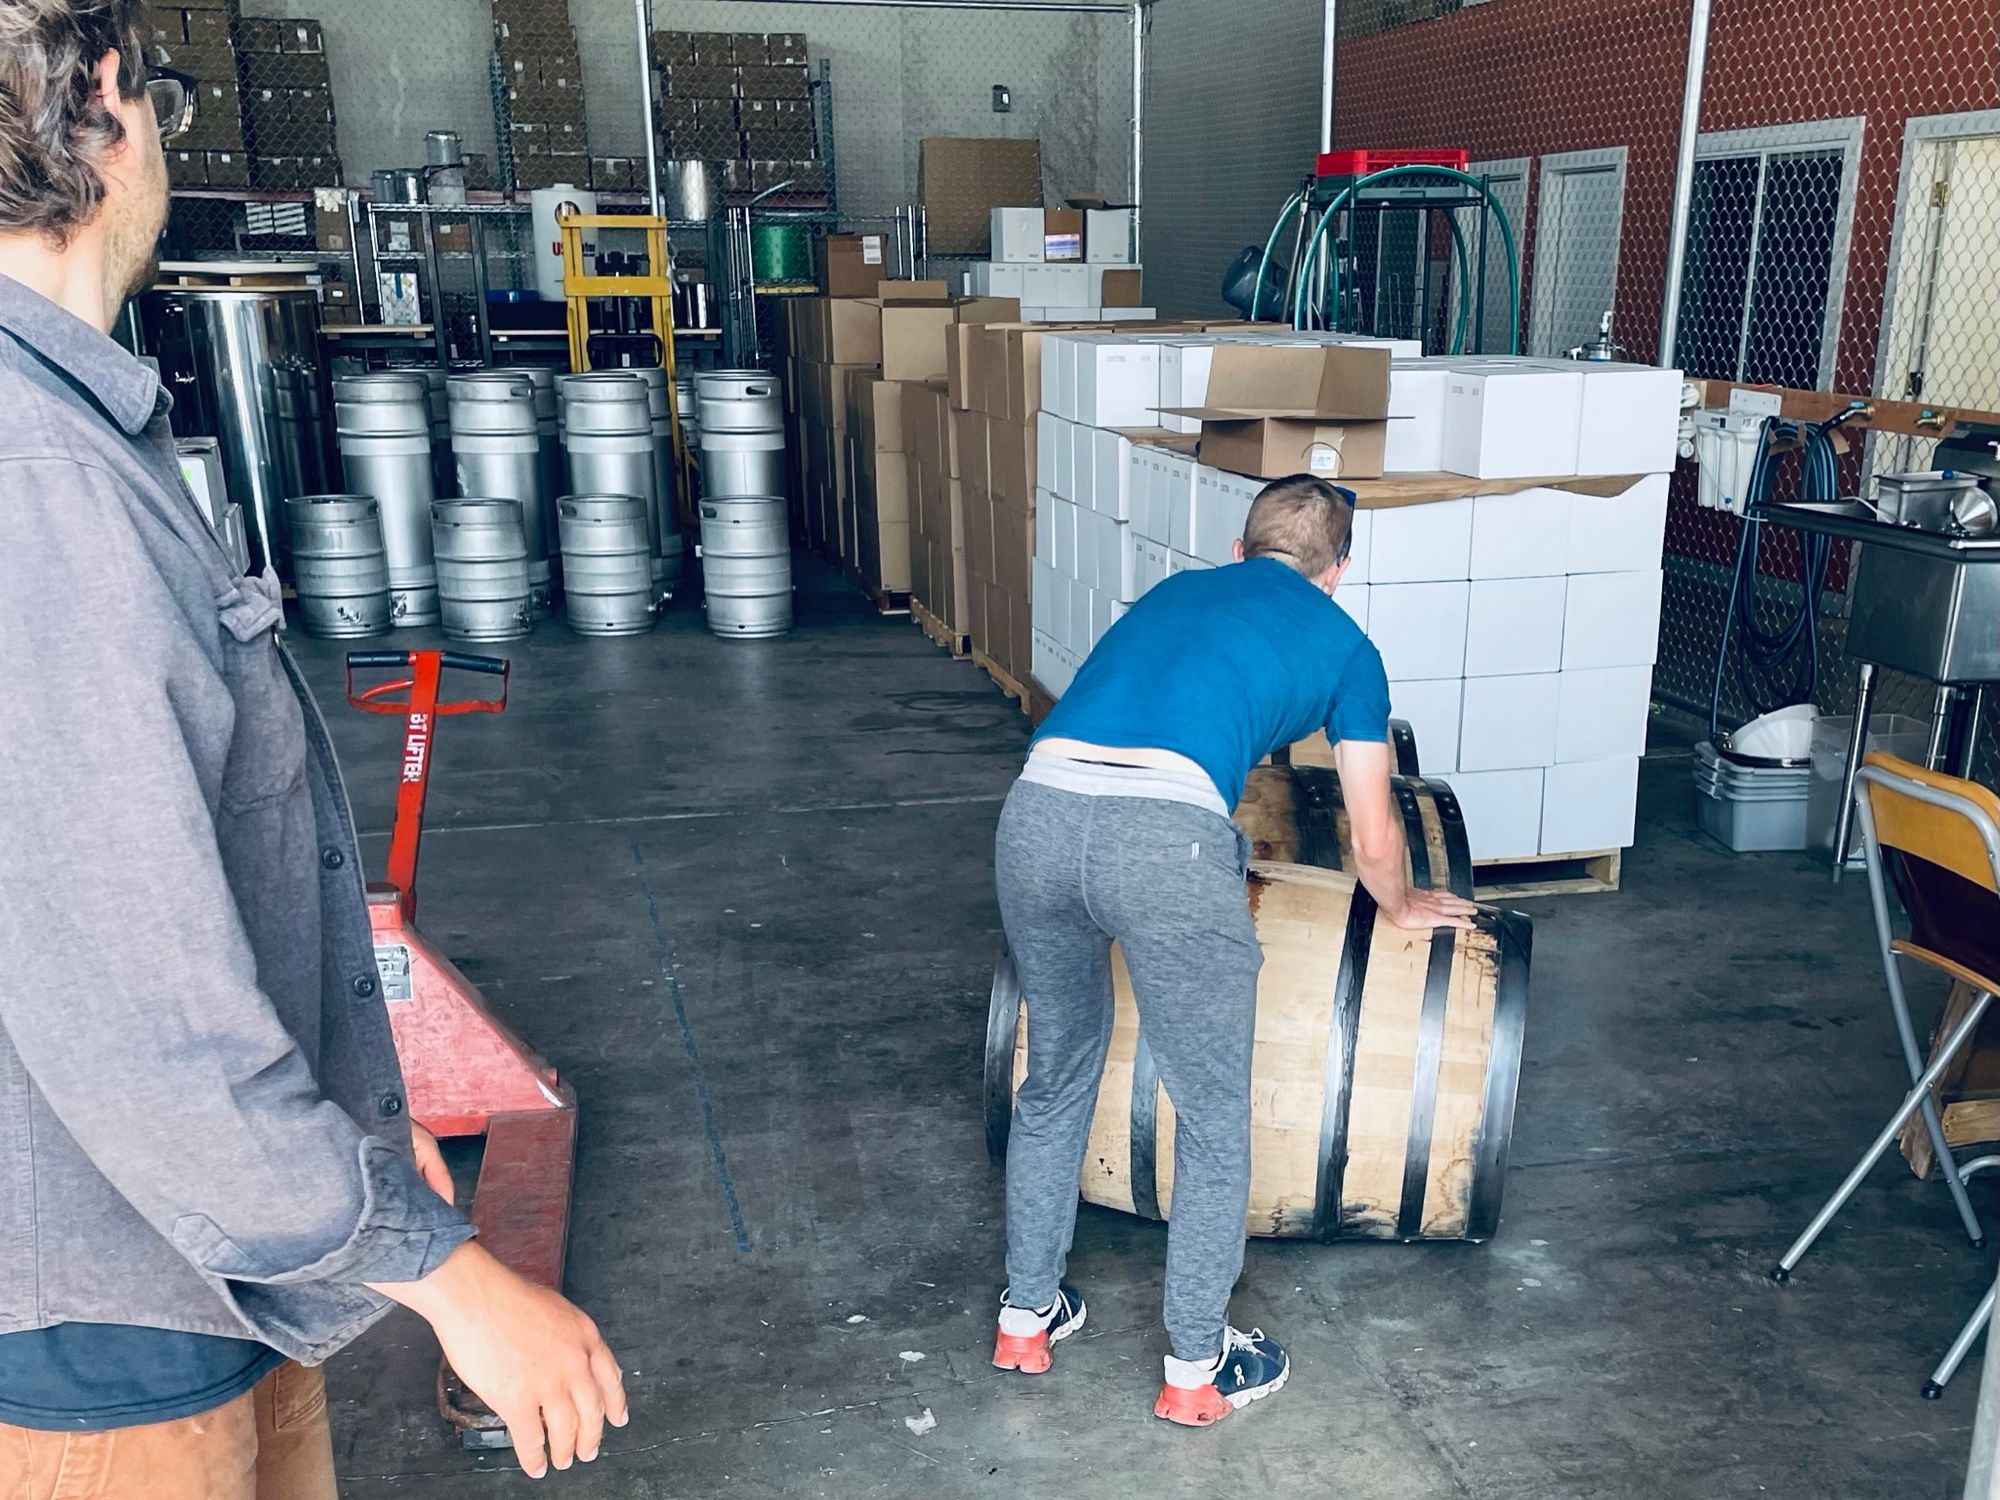 Two people rolling whiskey barrels into an industrial warehouse.